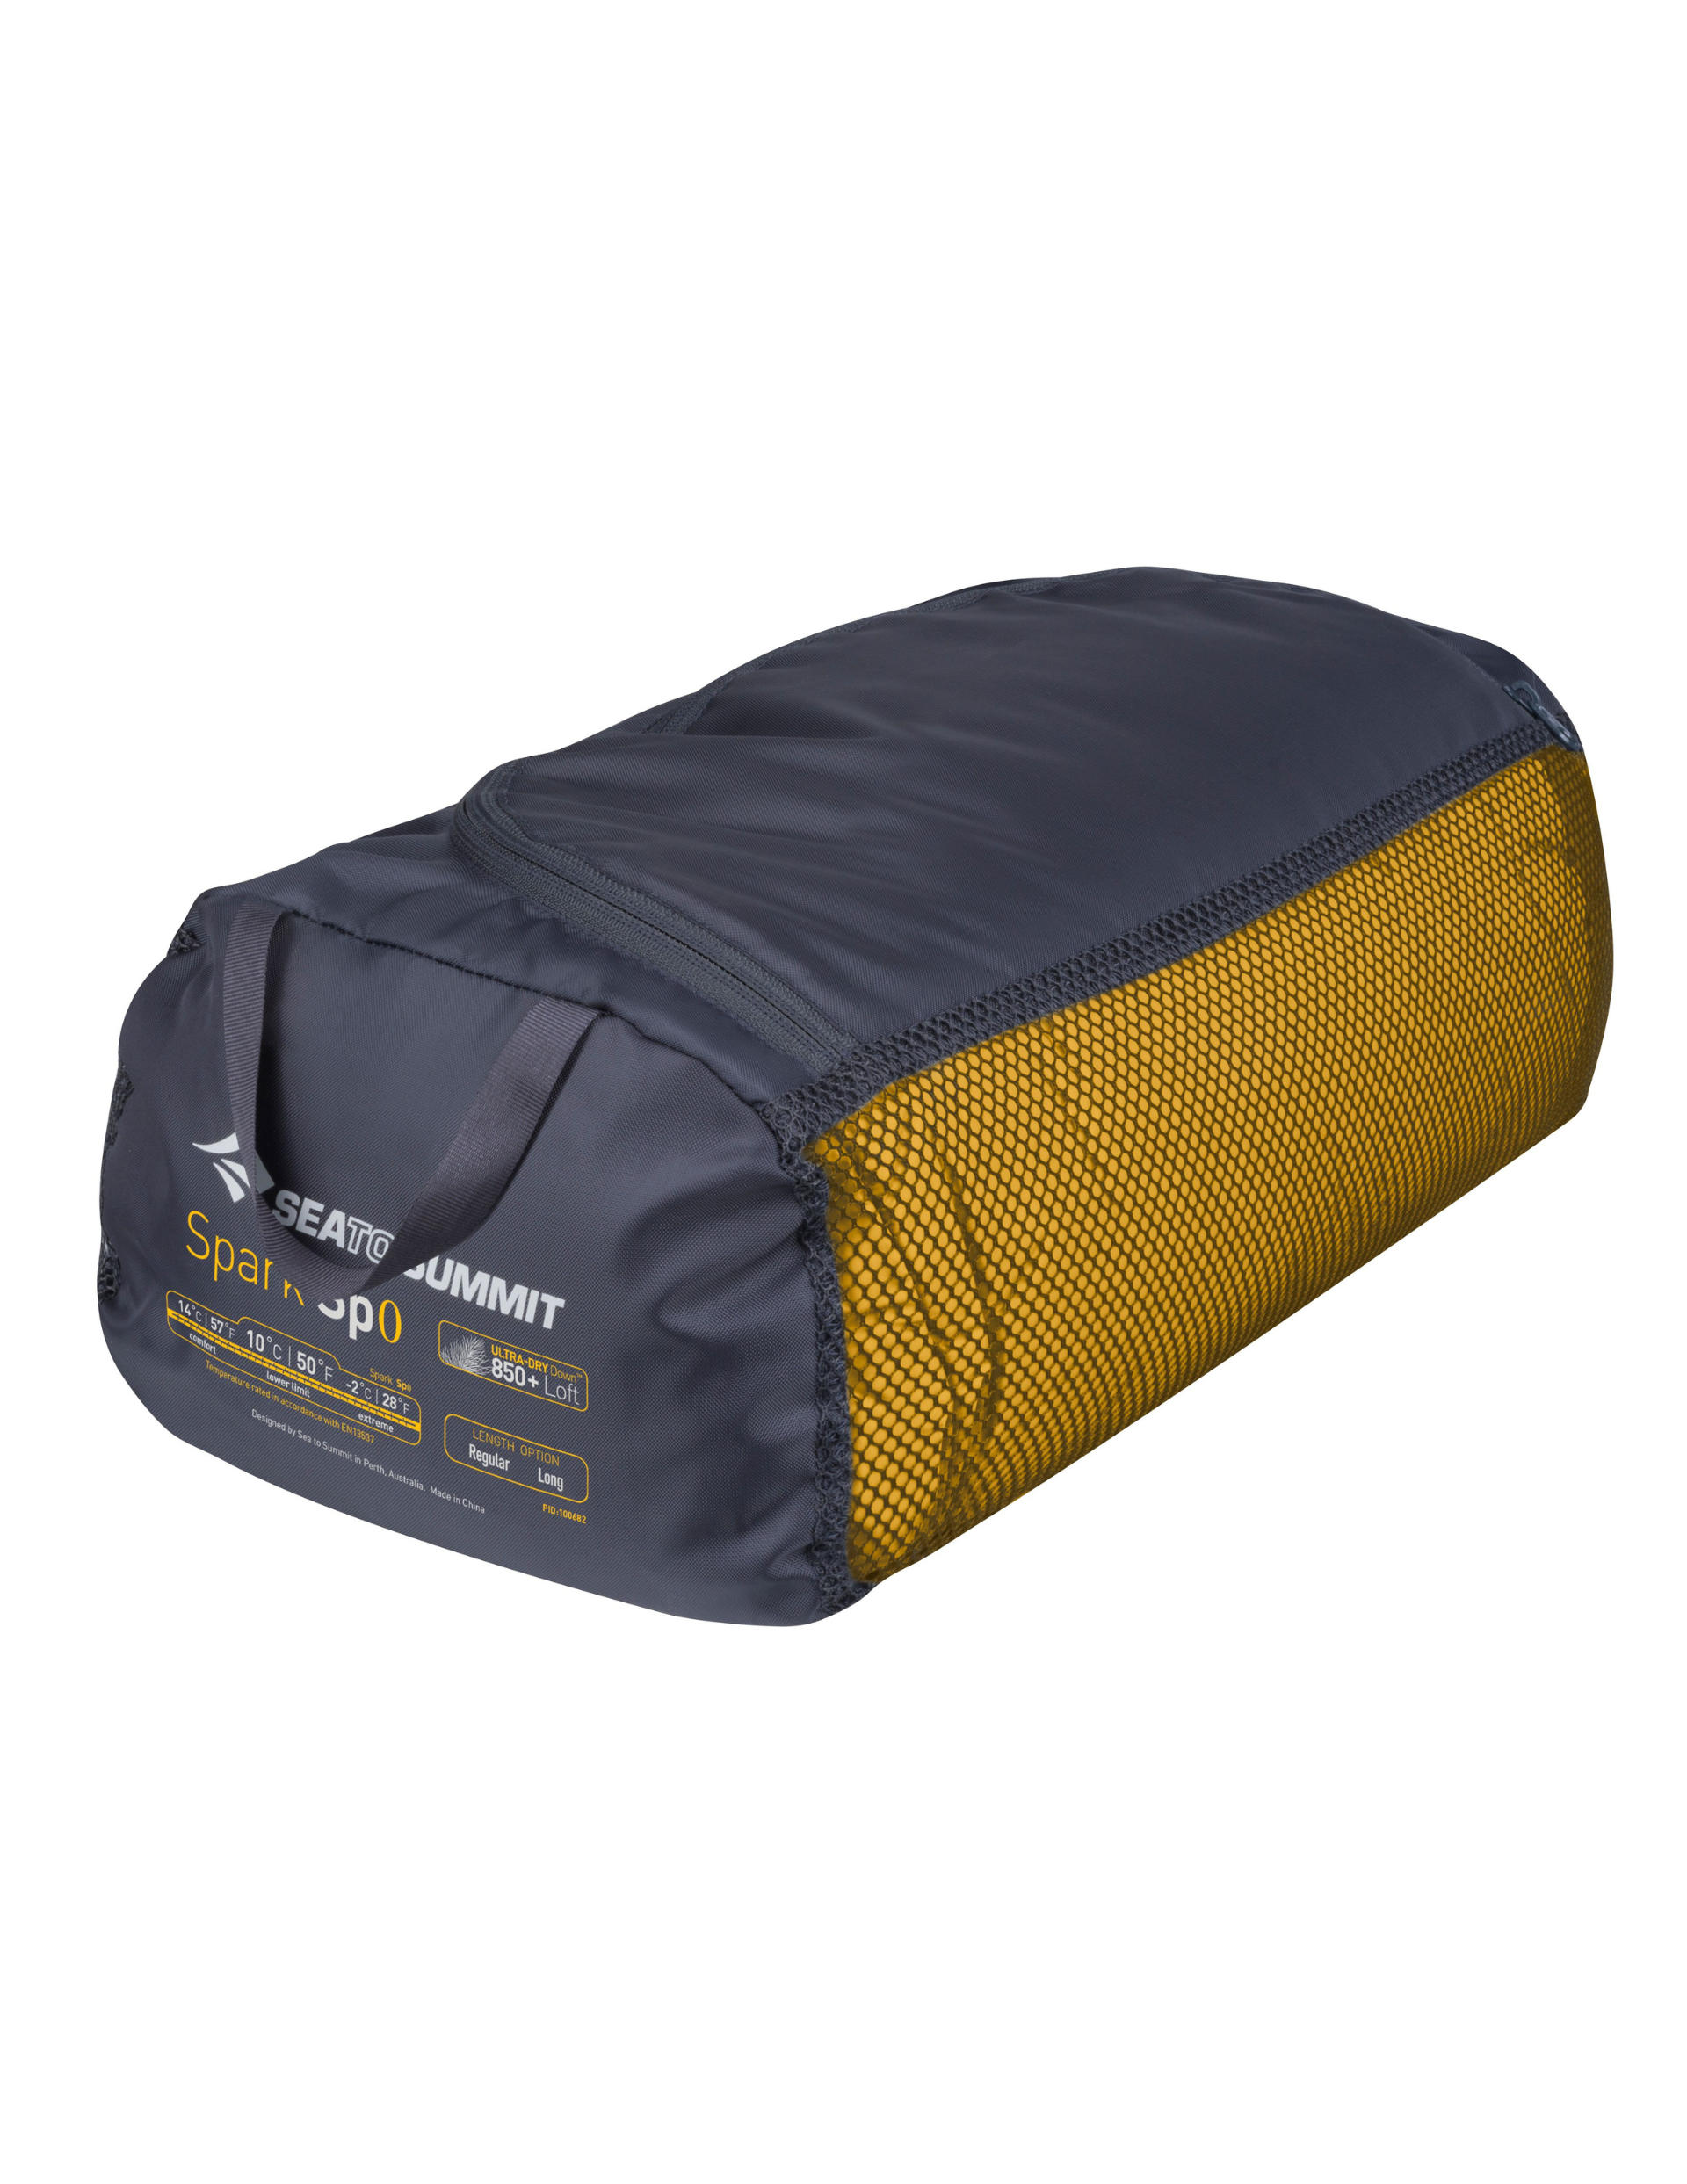 Sac de Couchage Sea to Summit Spark SP 0 Long